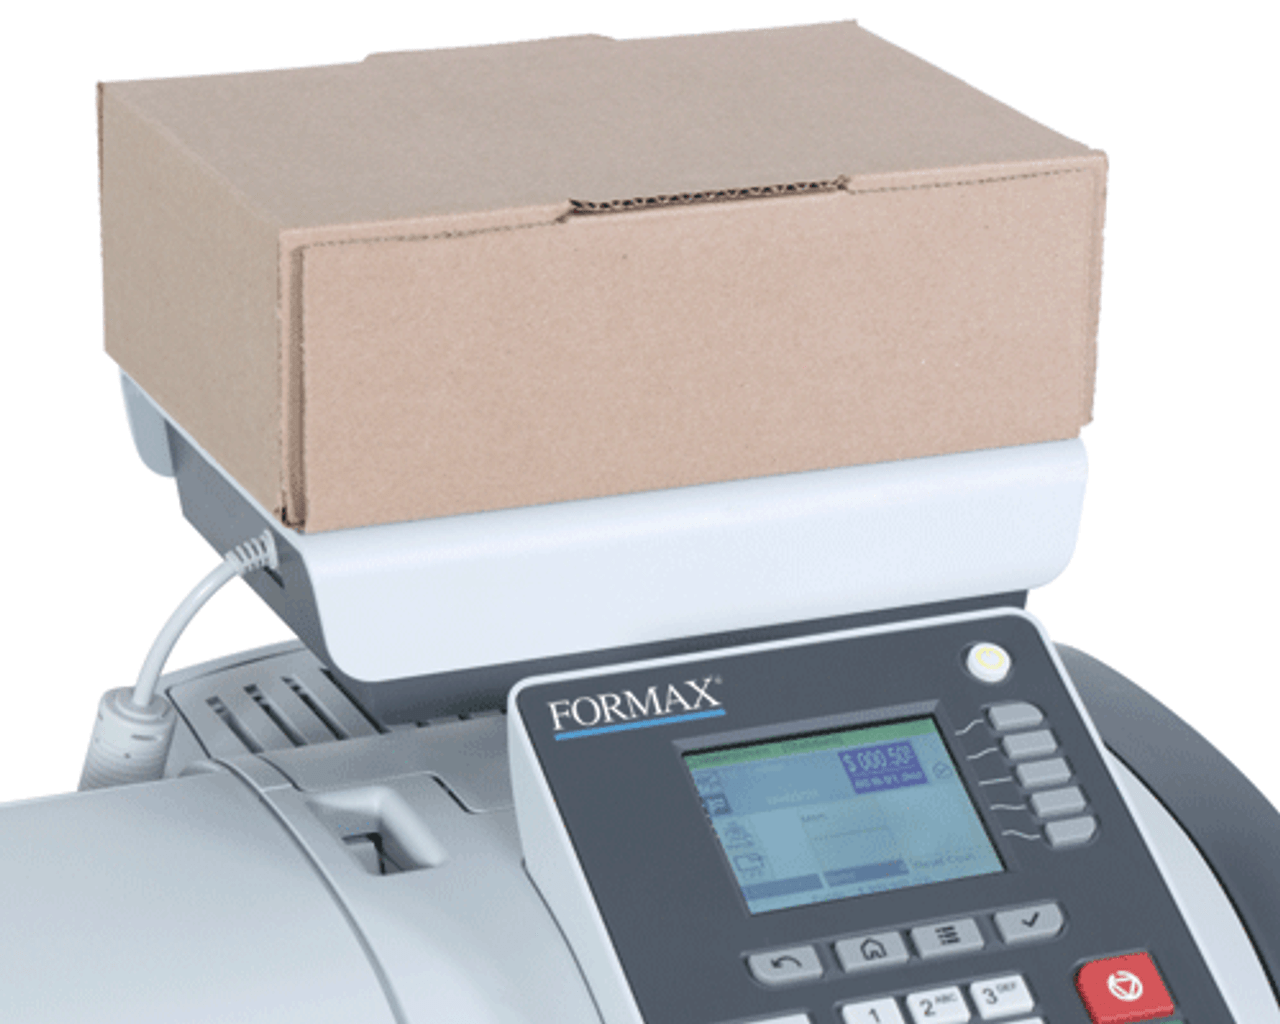 Mint 210 Series Mailing System